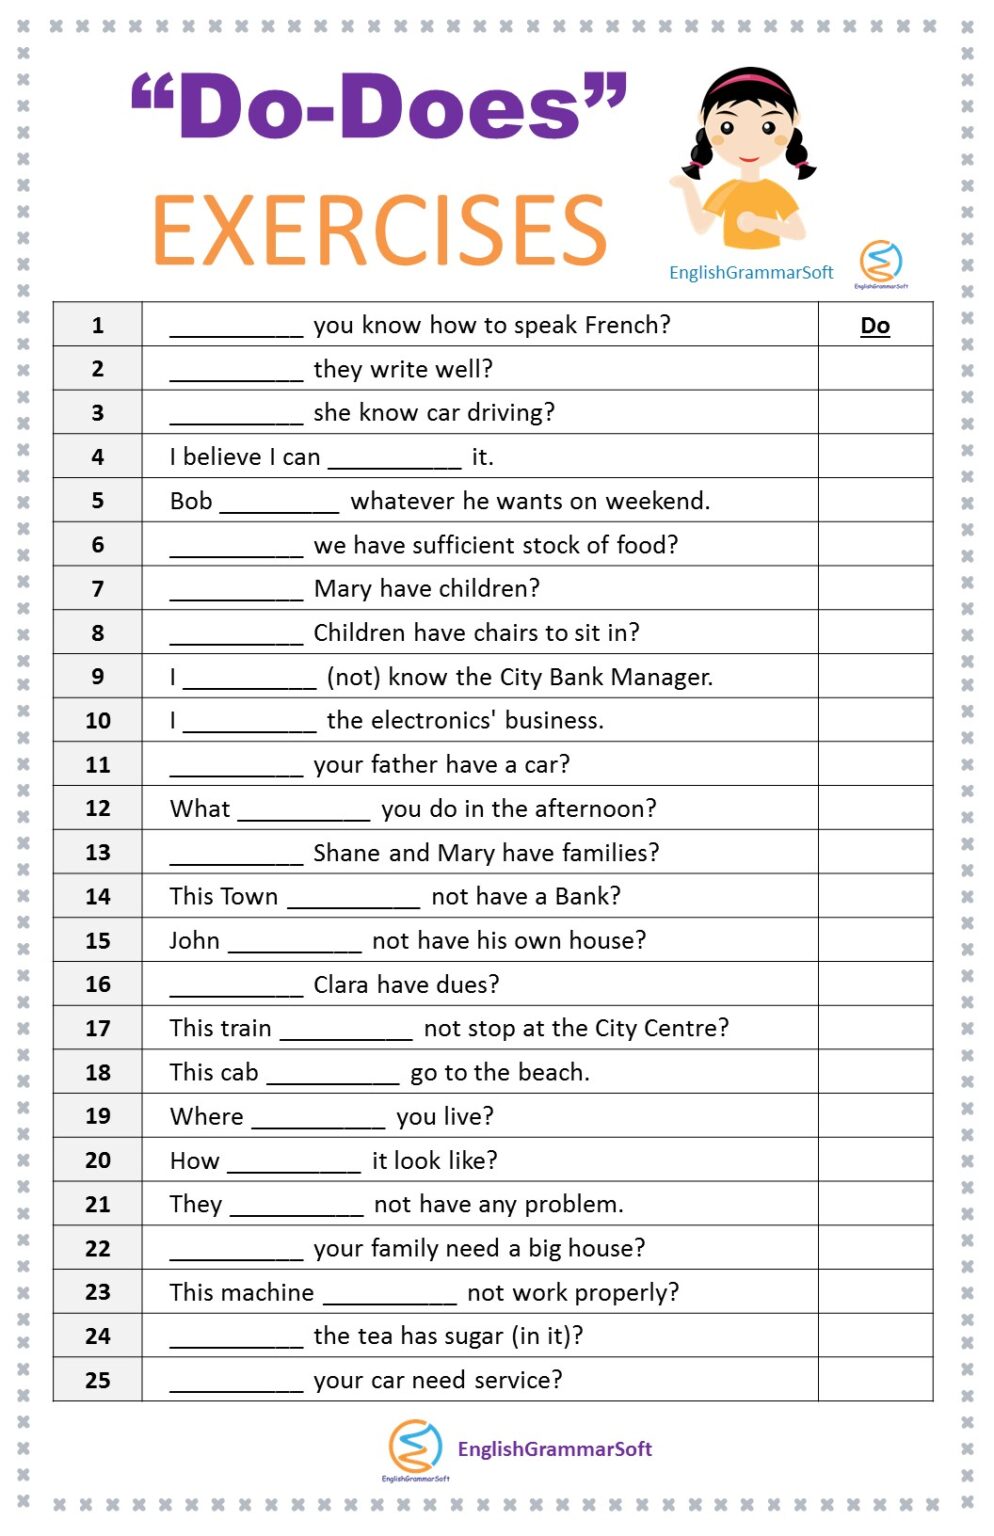 do-does-exercises-worksheet-with-answers-englishgrammarsoft